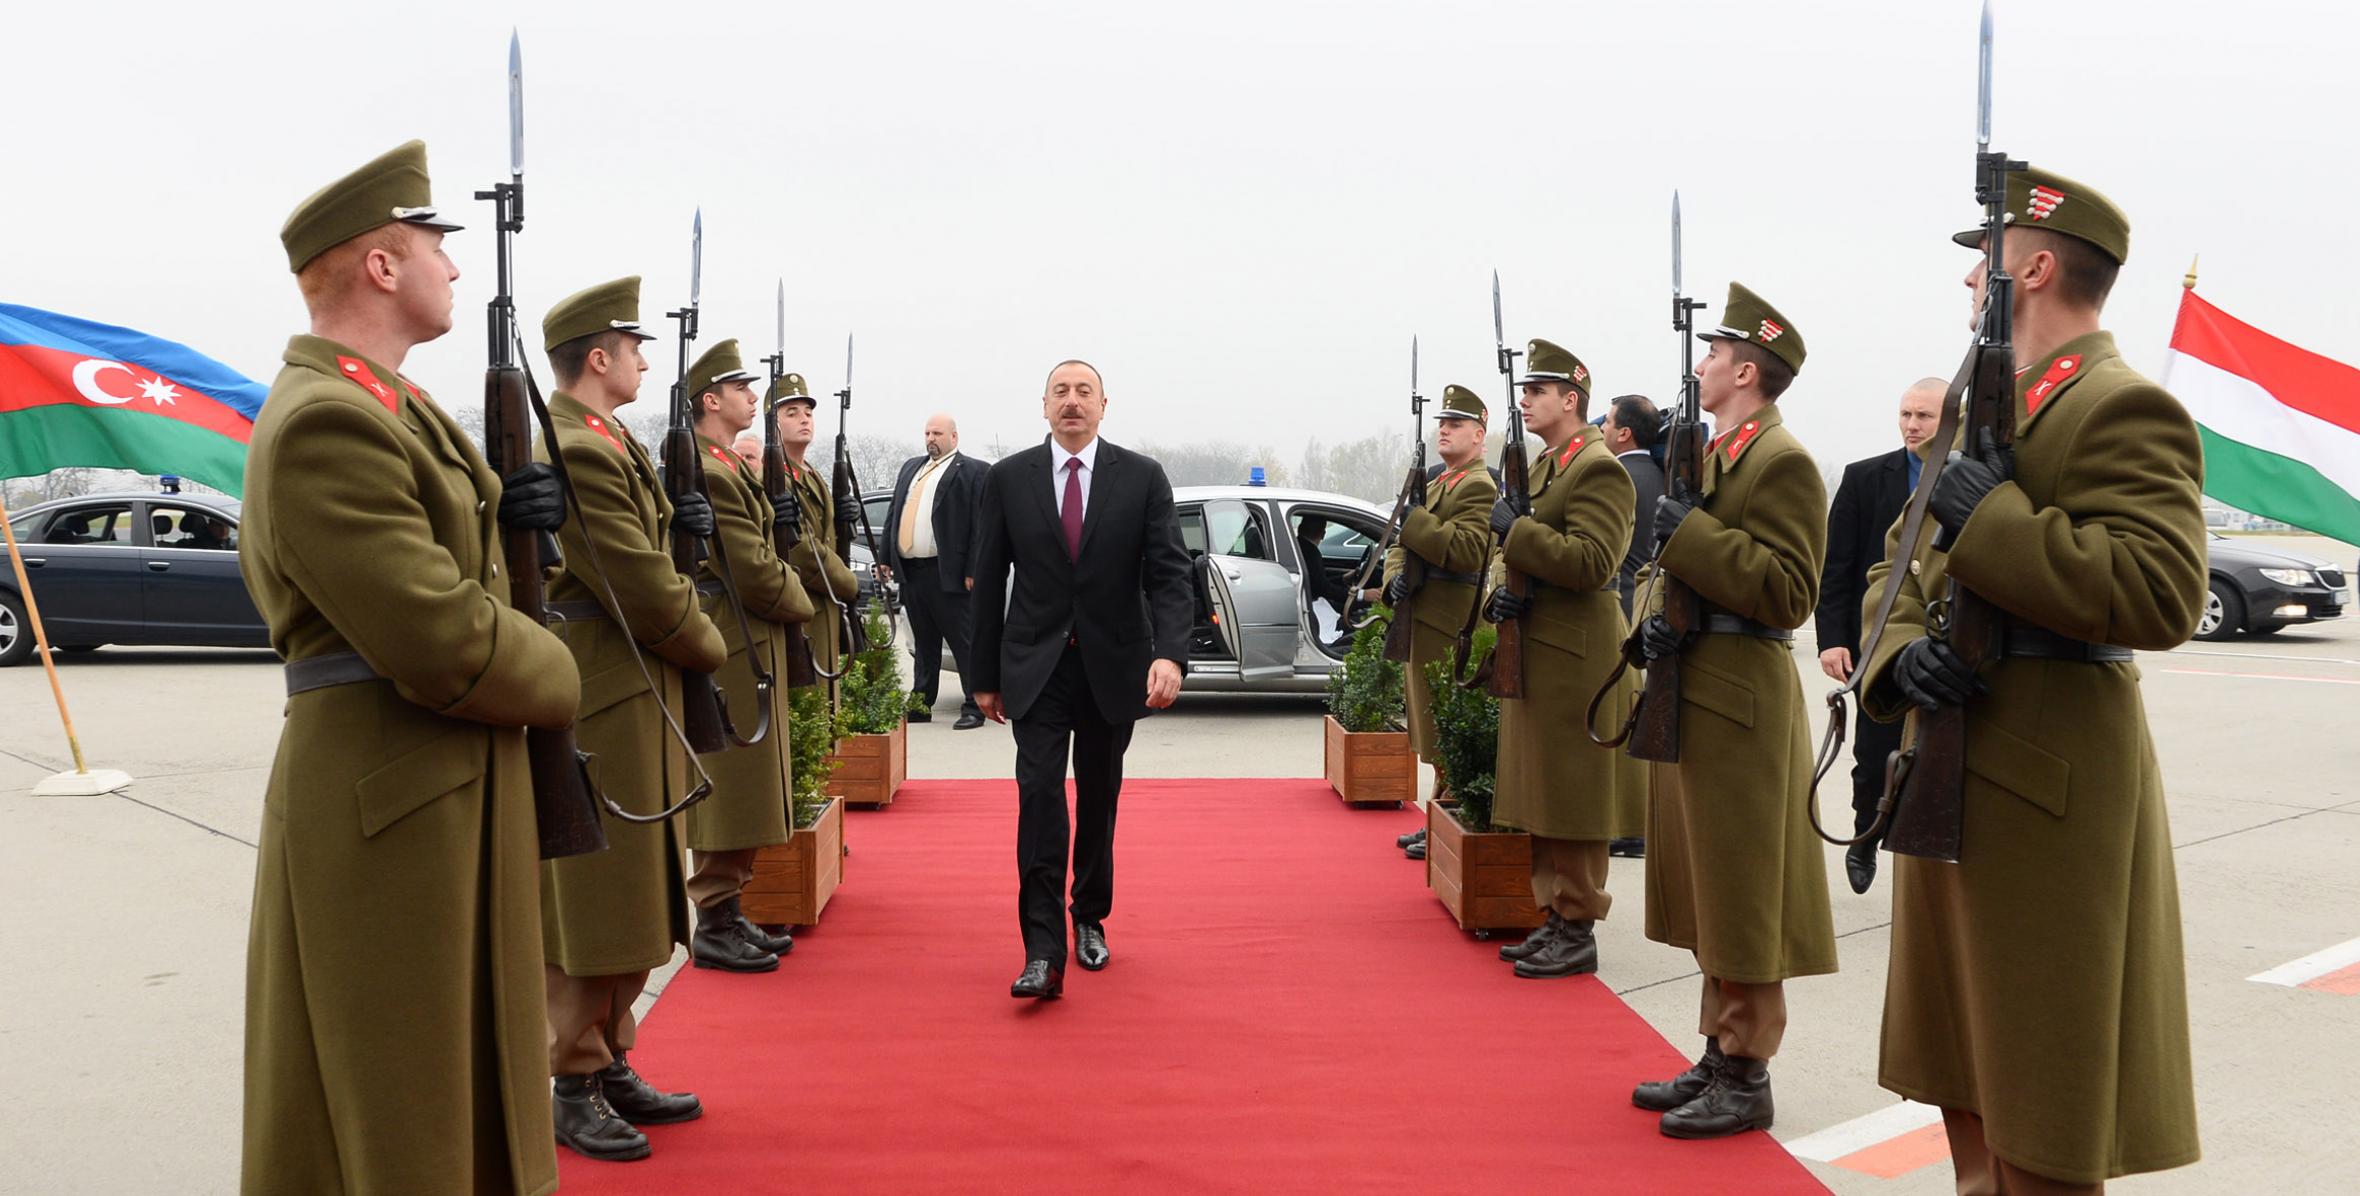 Ilham Aliyev’s working visit to Hungary ended